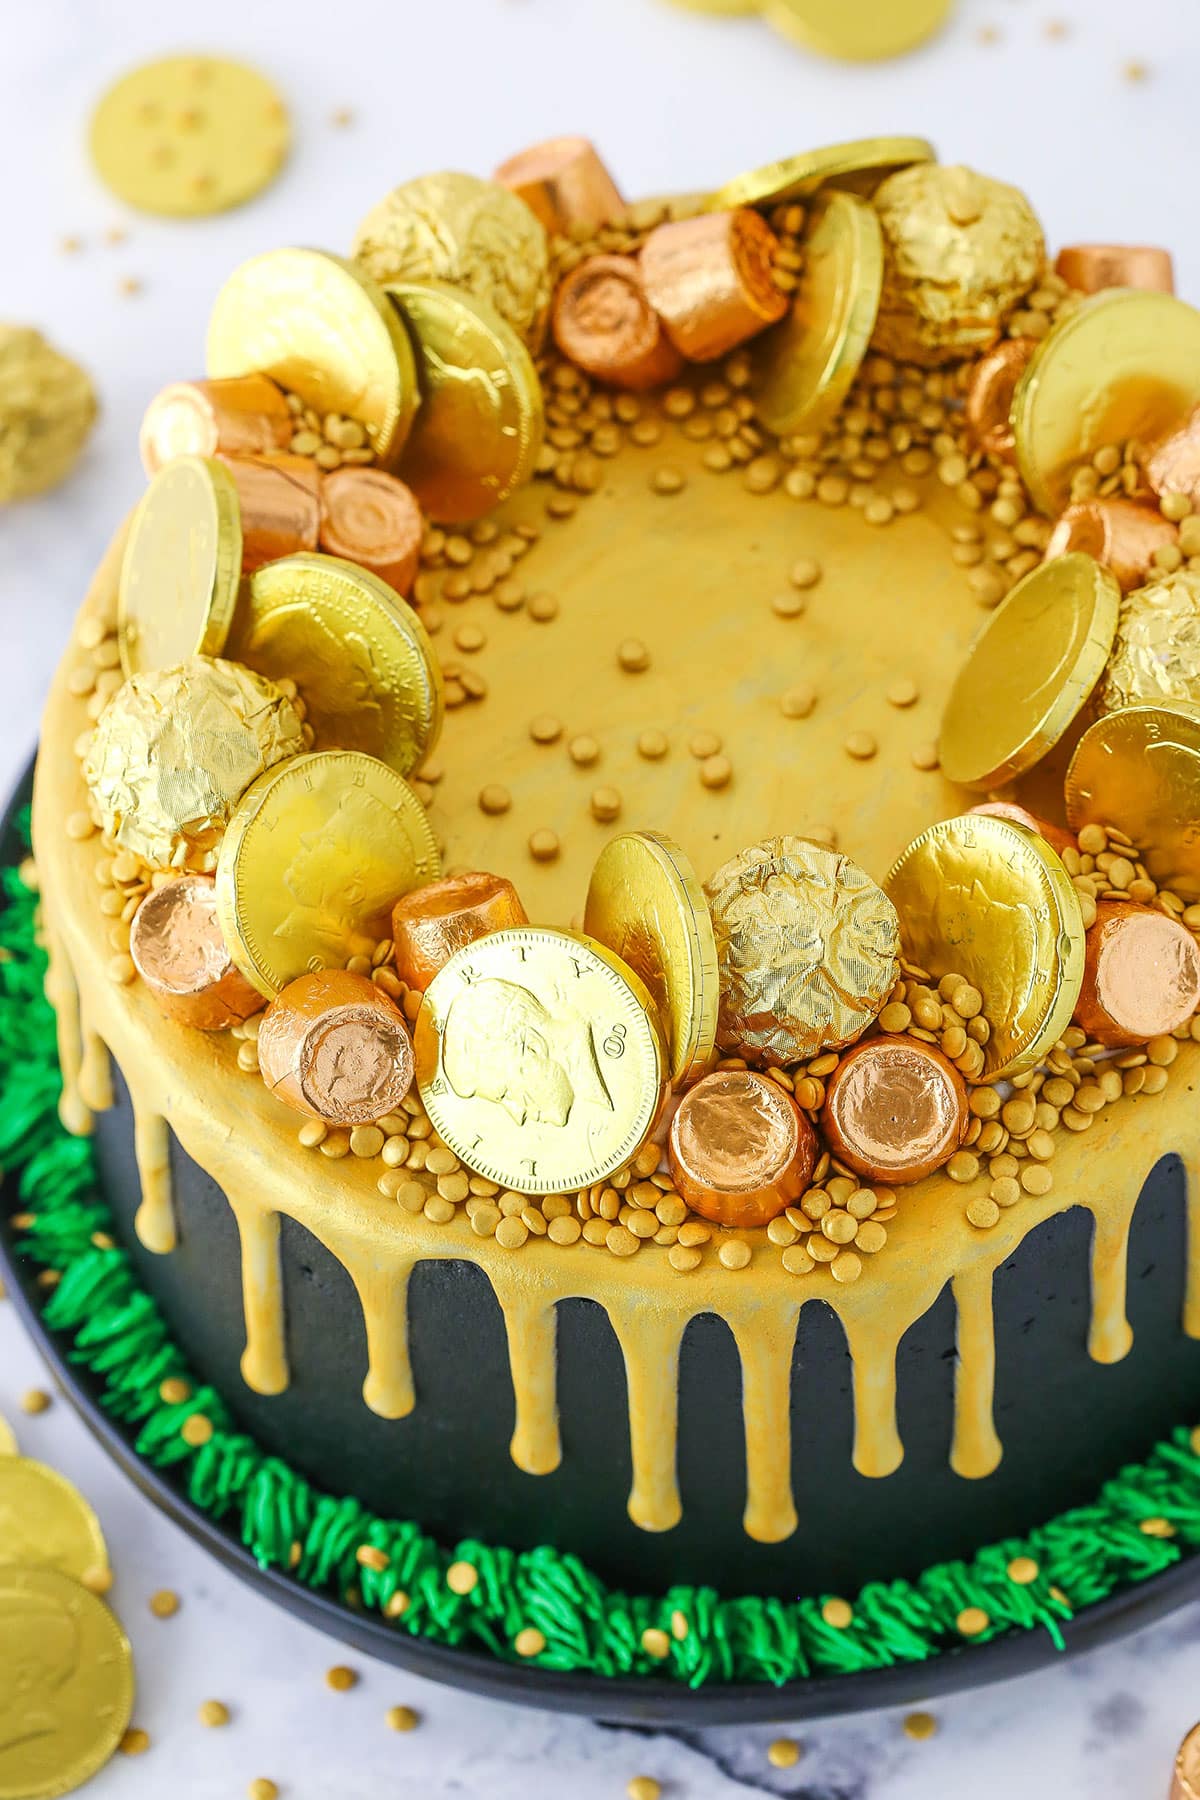 37 Pretty Cake Ideas For Your Next Celebration : Chocolate cake with gold  cherries